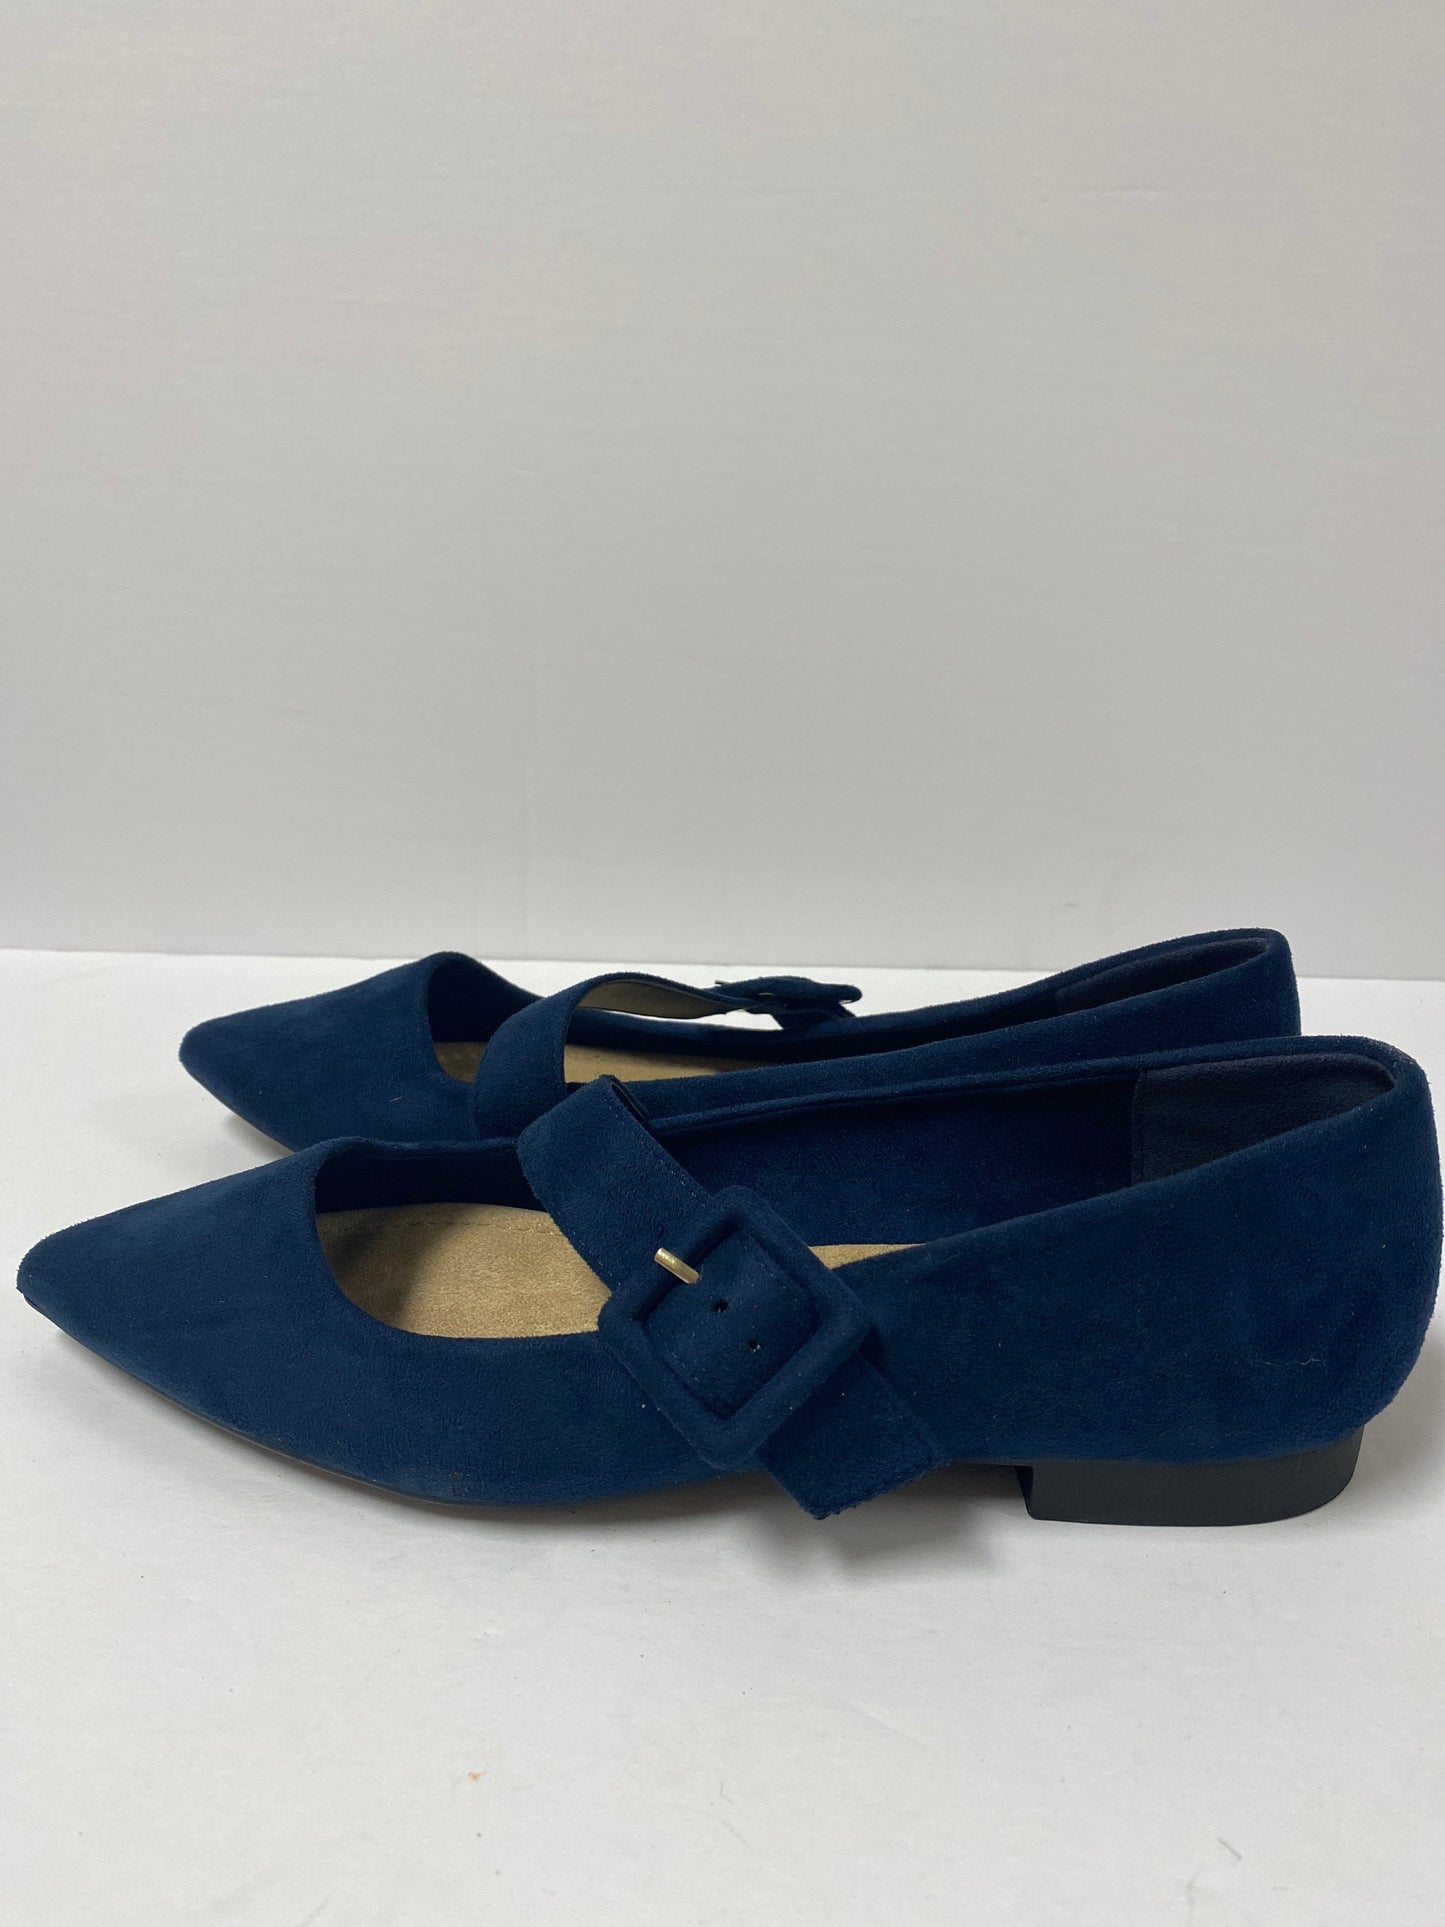 Shoes Flats Ballet By Clothes Mentor  Size: 9